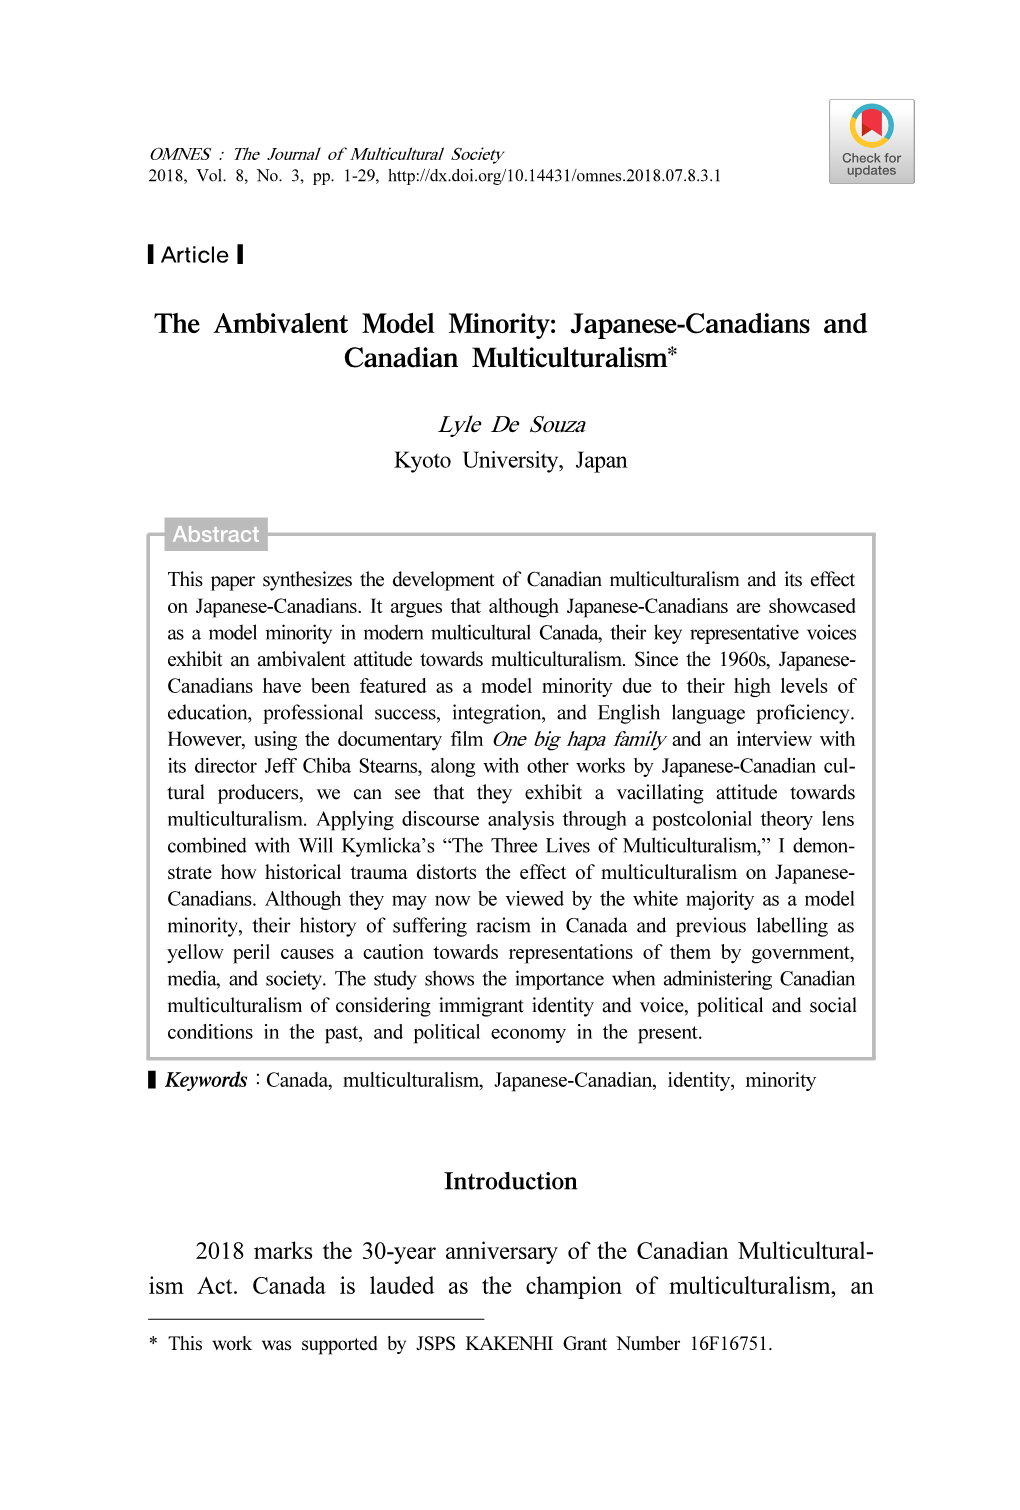 The Ambivalent Model Minority: Japanese-Canadians and Canadian Multiculturalism*